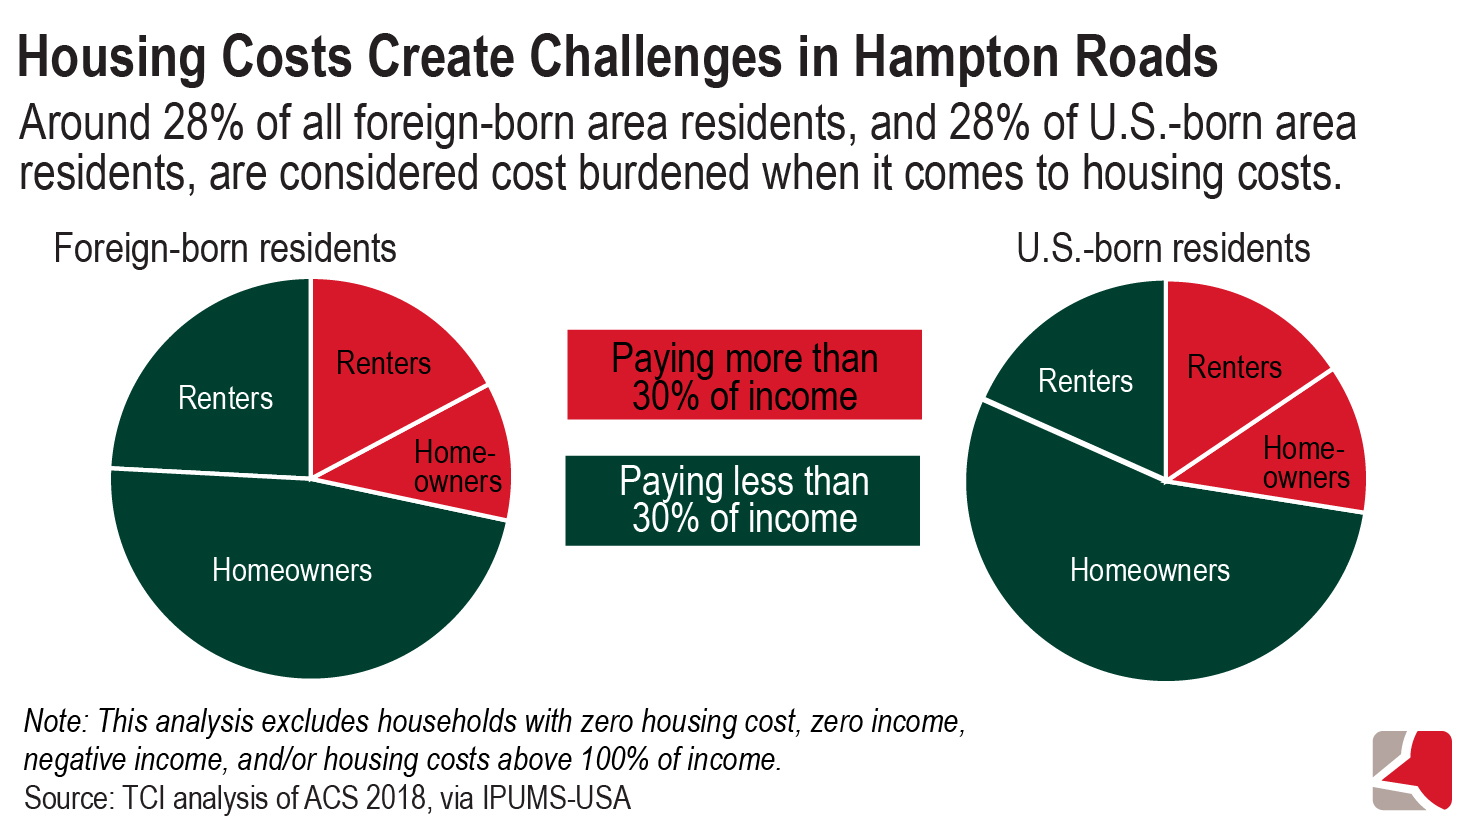 Two circle graphs showing average share of income paid toward housing for foreign-born and U.S. born residents in Hampton Roads.  About 28% of all foreign-born and U.S. born area residents are considered cost-burdened when it comes to housing, based on analysis of ACS 2018 data via IPUMS-USA